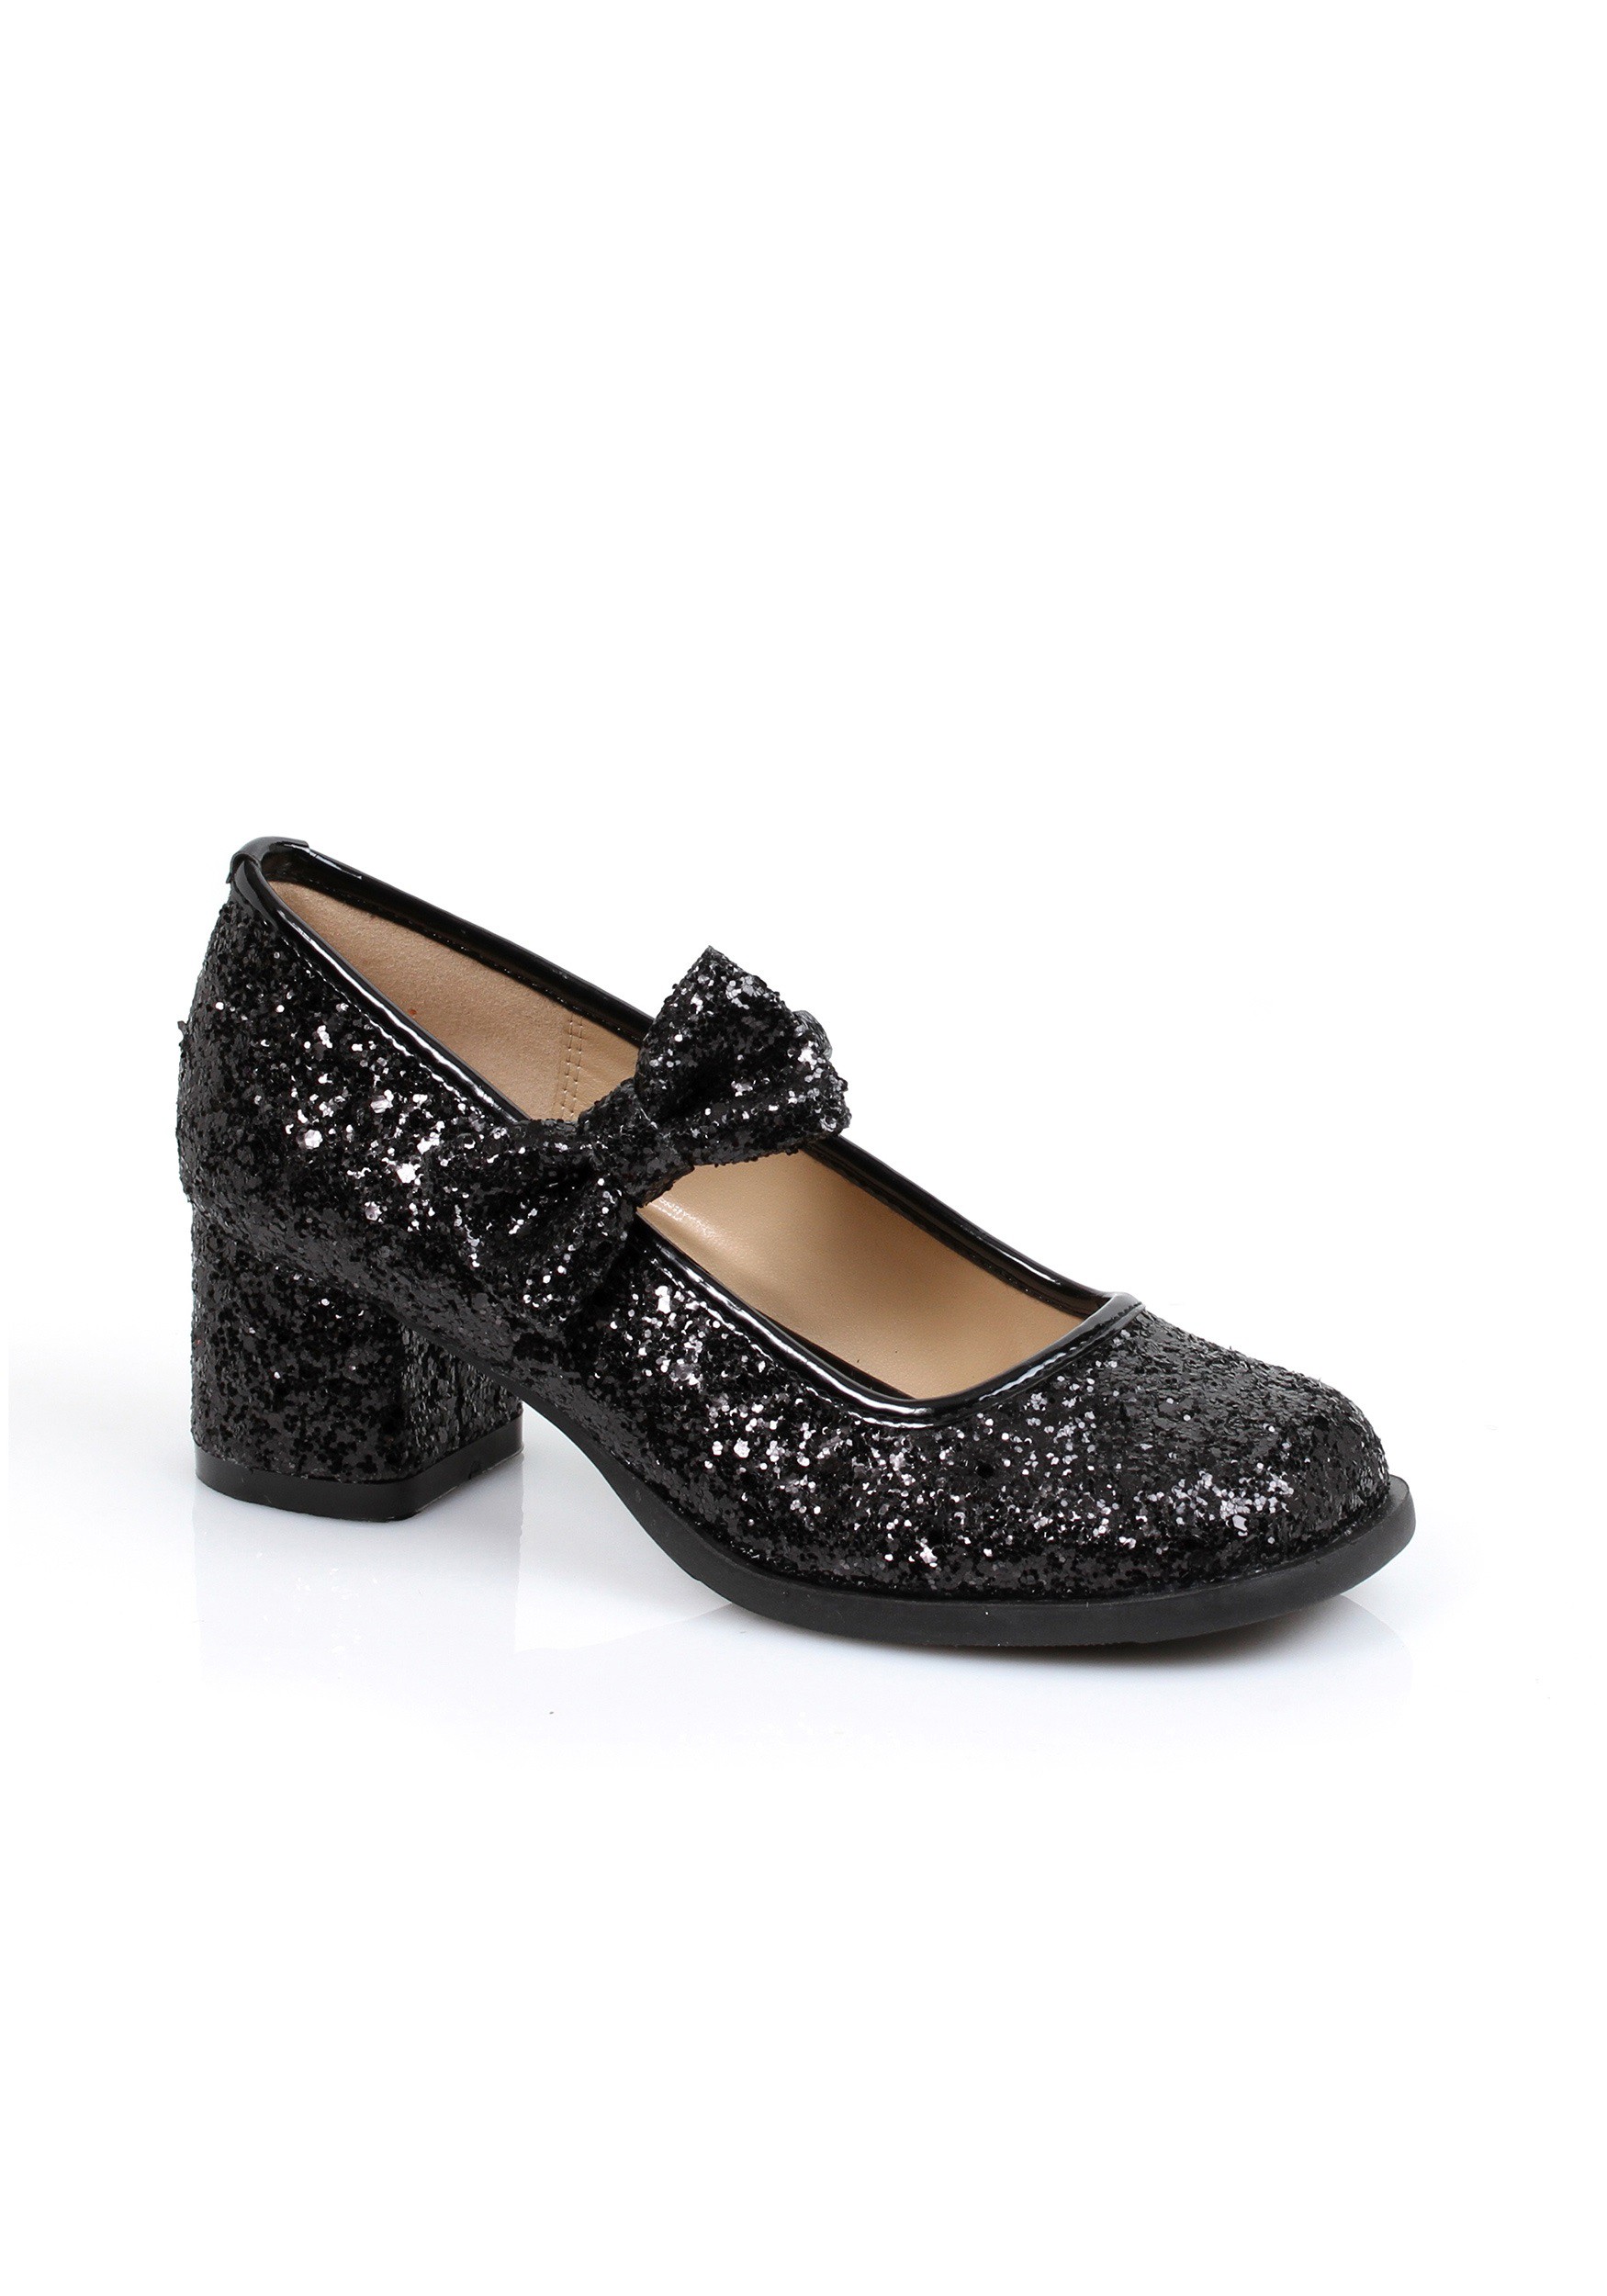 girls black sparkly shoes